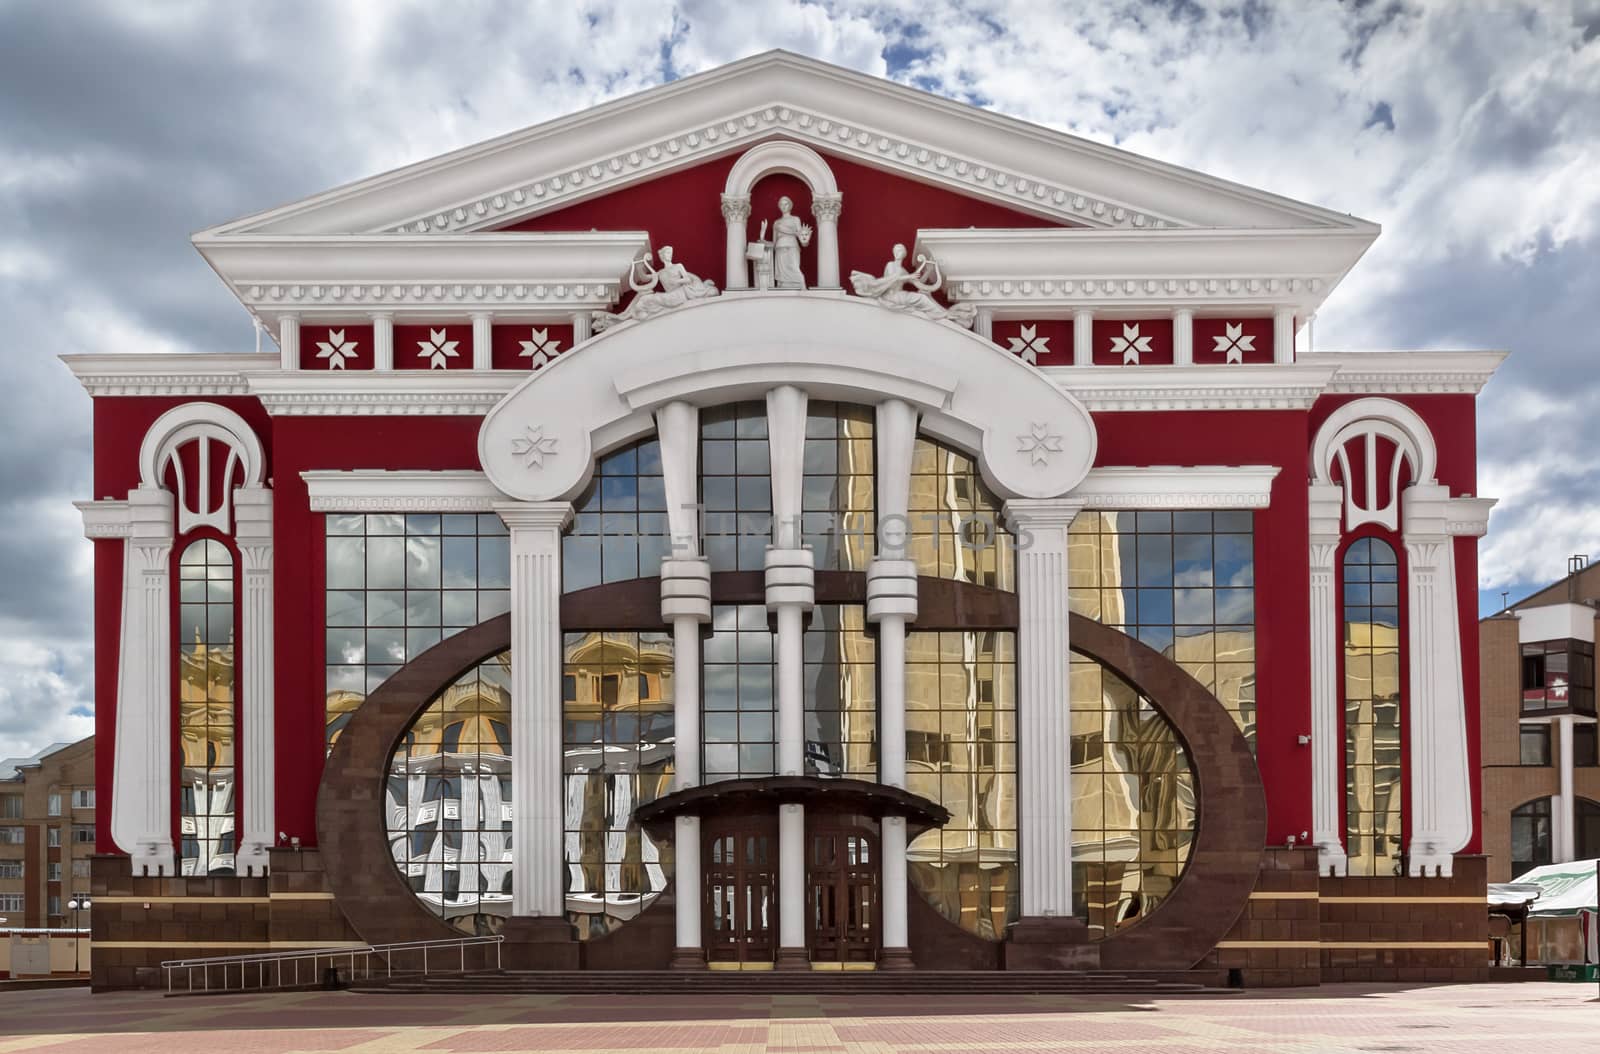 The Opera house in Saransk, Russia. The capital of the Mordovian Republic.